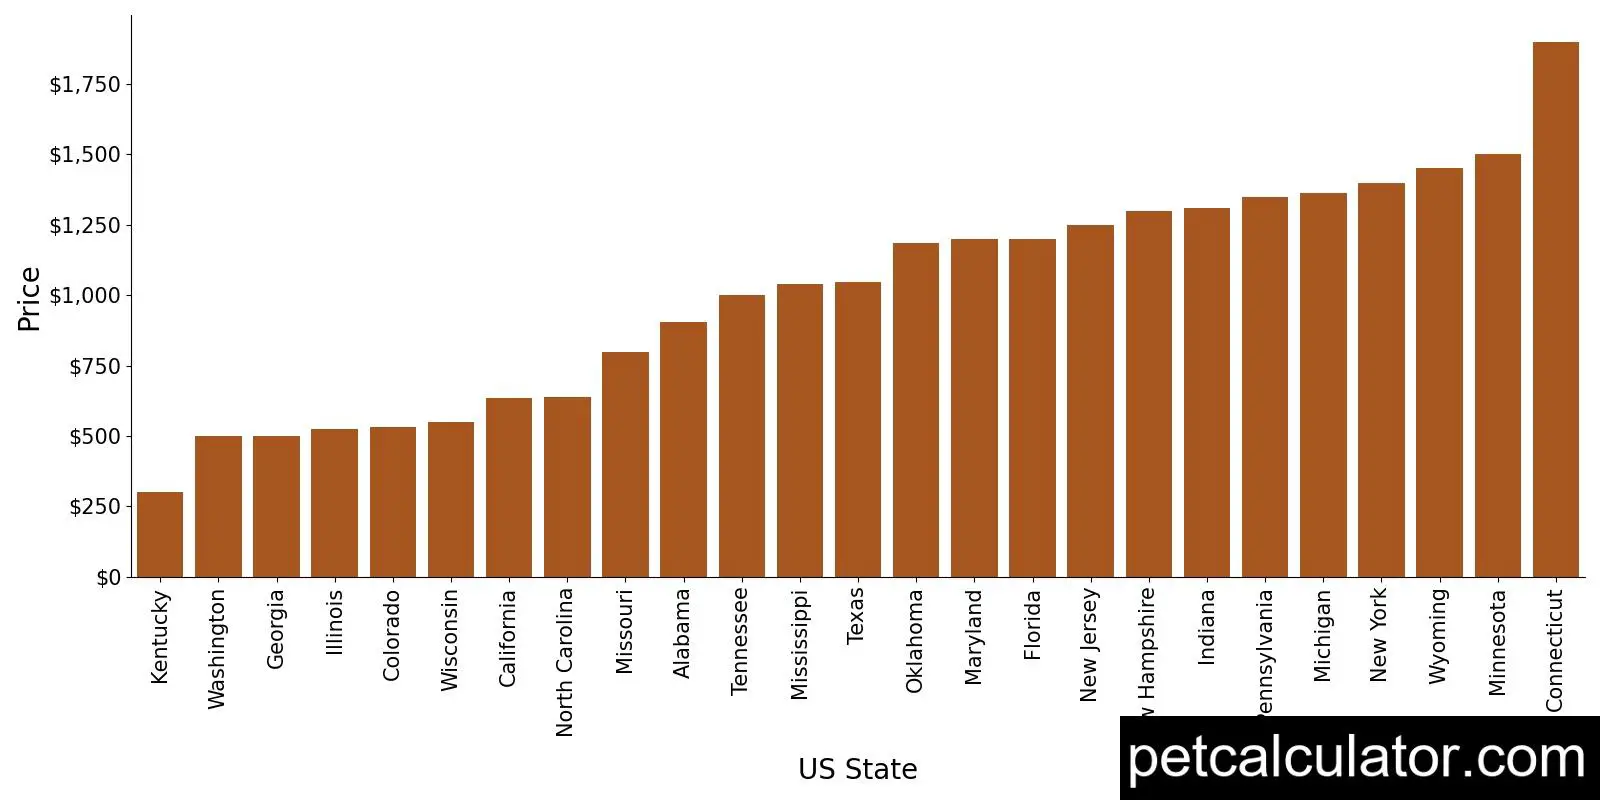 Price of Chi-Poo by US State 